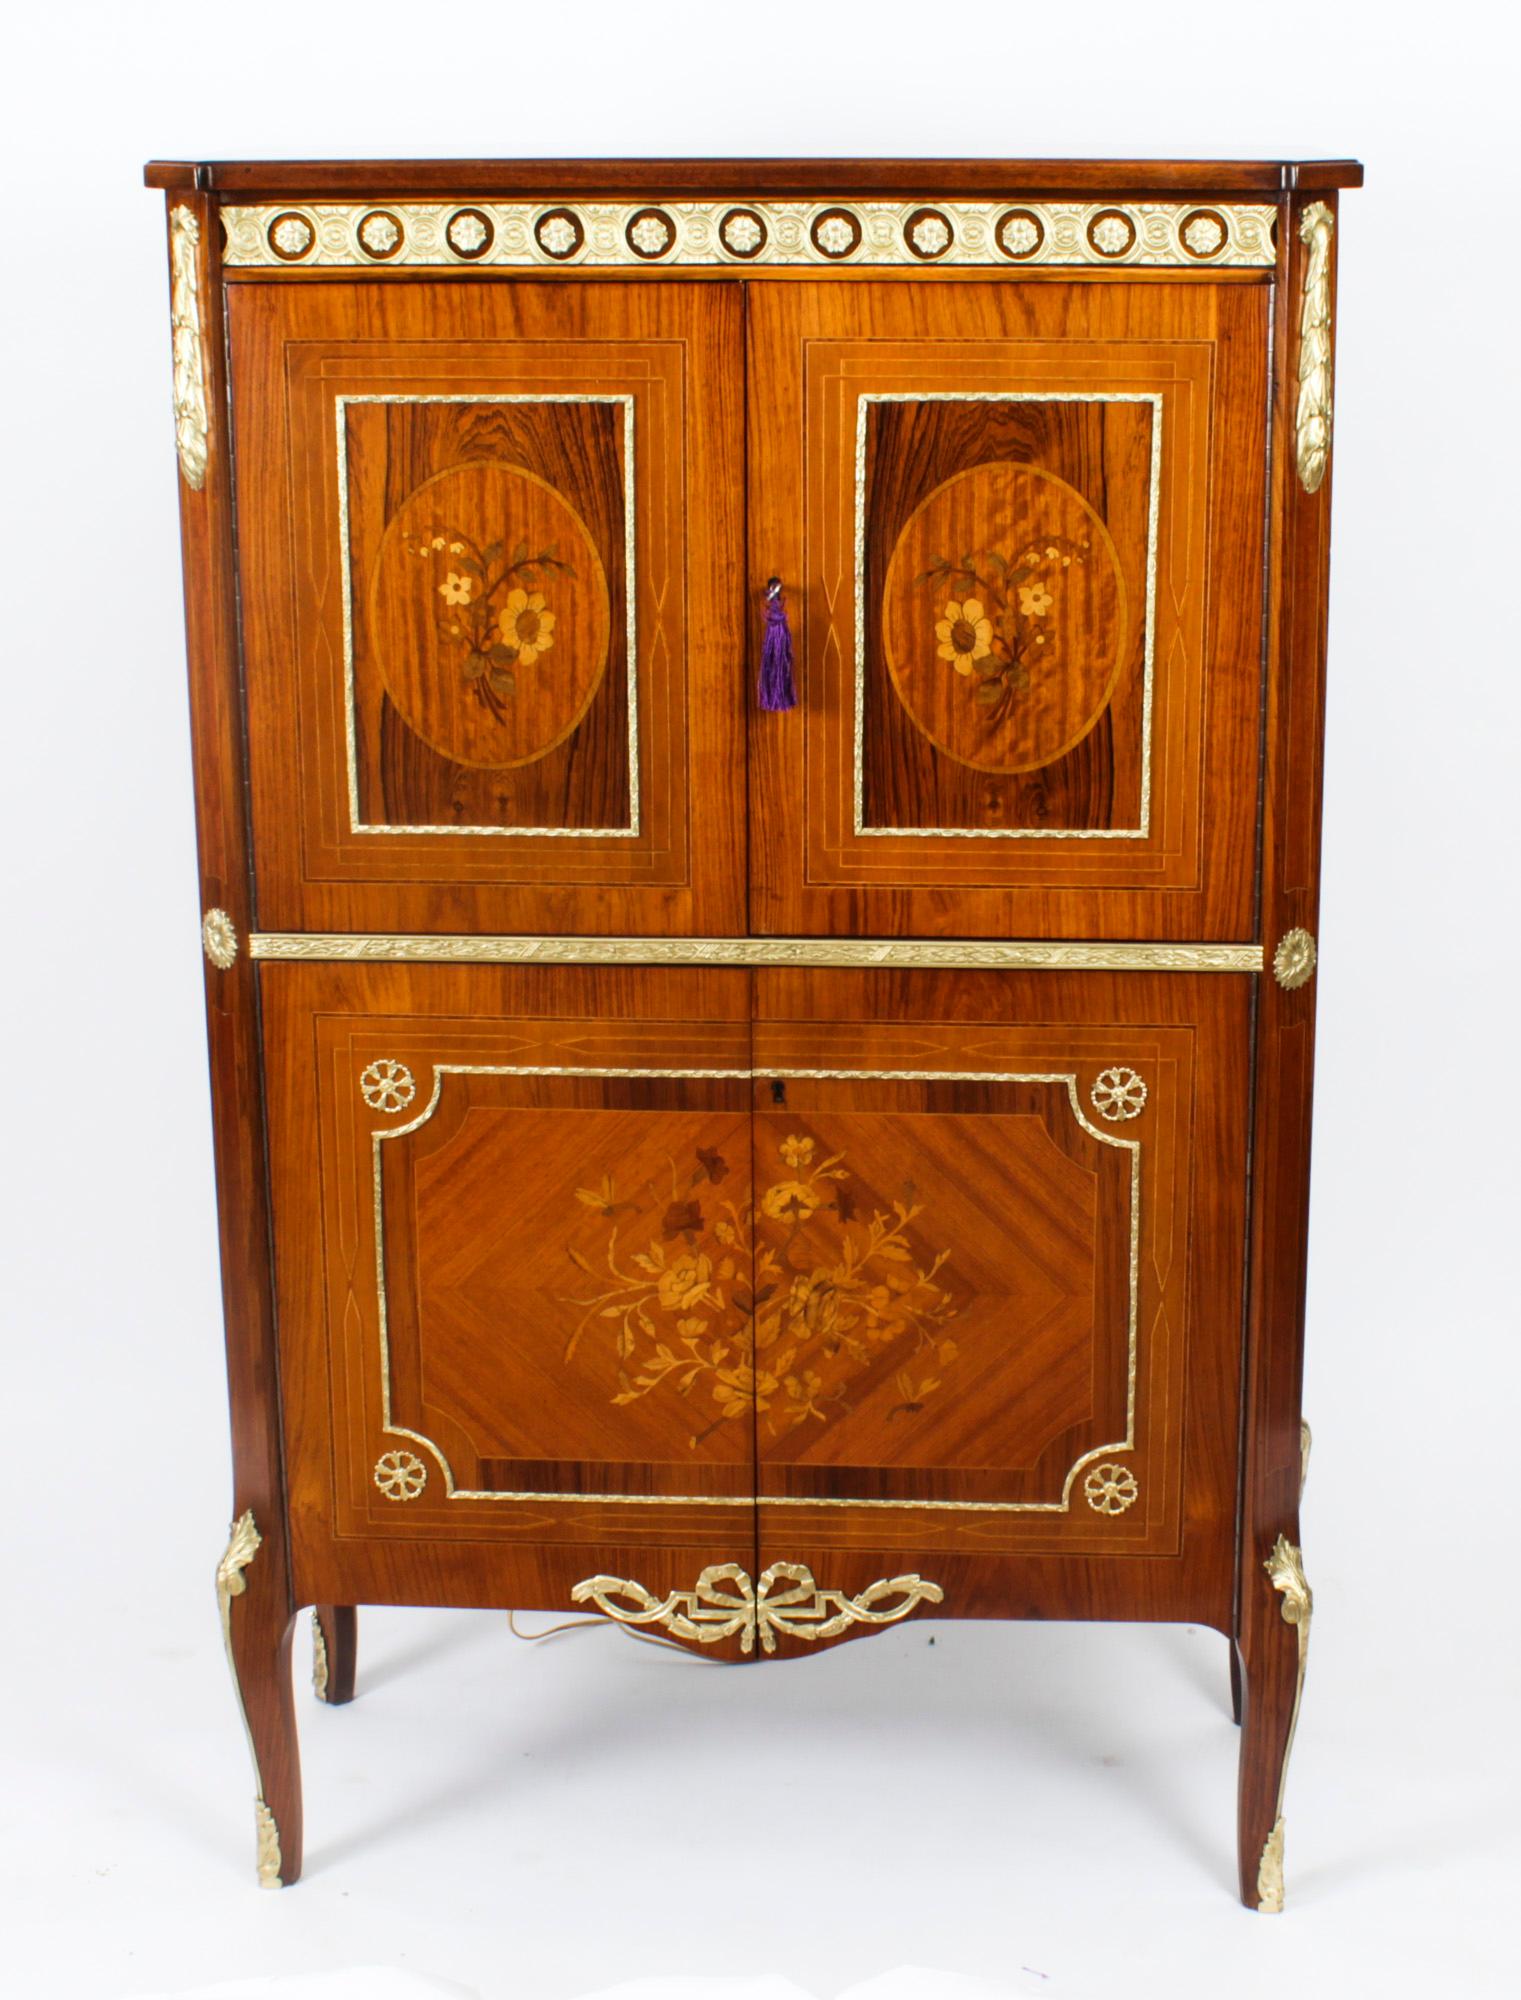 This is a stupendous vintage Meuble Francais Empire Revival burr walnut and ormolu mounted cocktail cabinet with fitted and mirrored interior, of the highest quality and dating from Circa 1970.

The upper part comprises a pair of doors that each